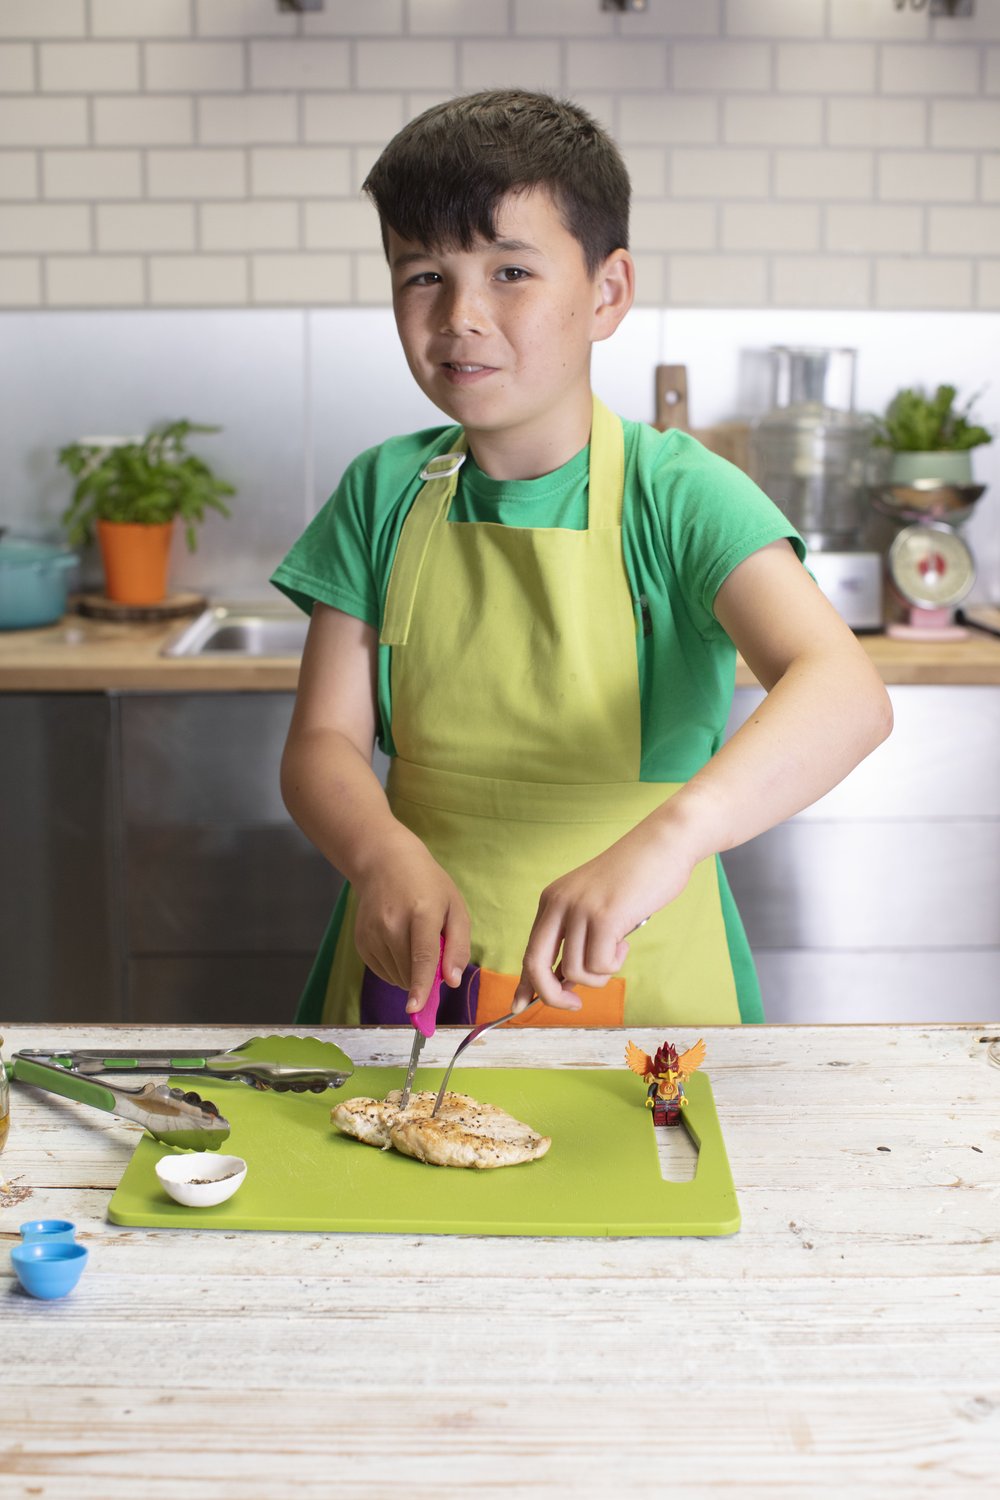 boy with green apron is slicing the bashed chicken